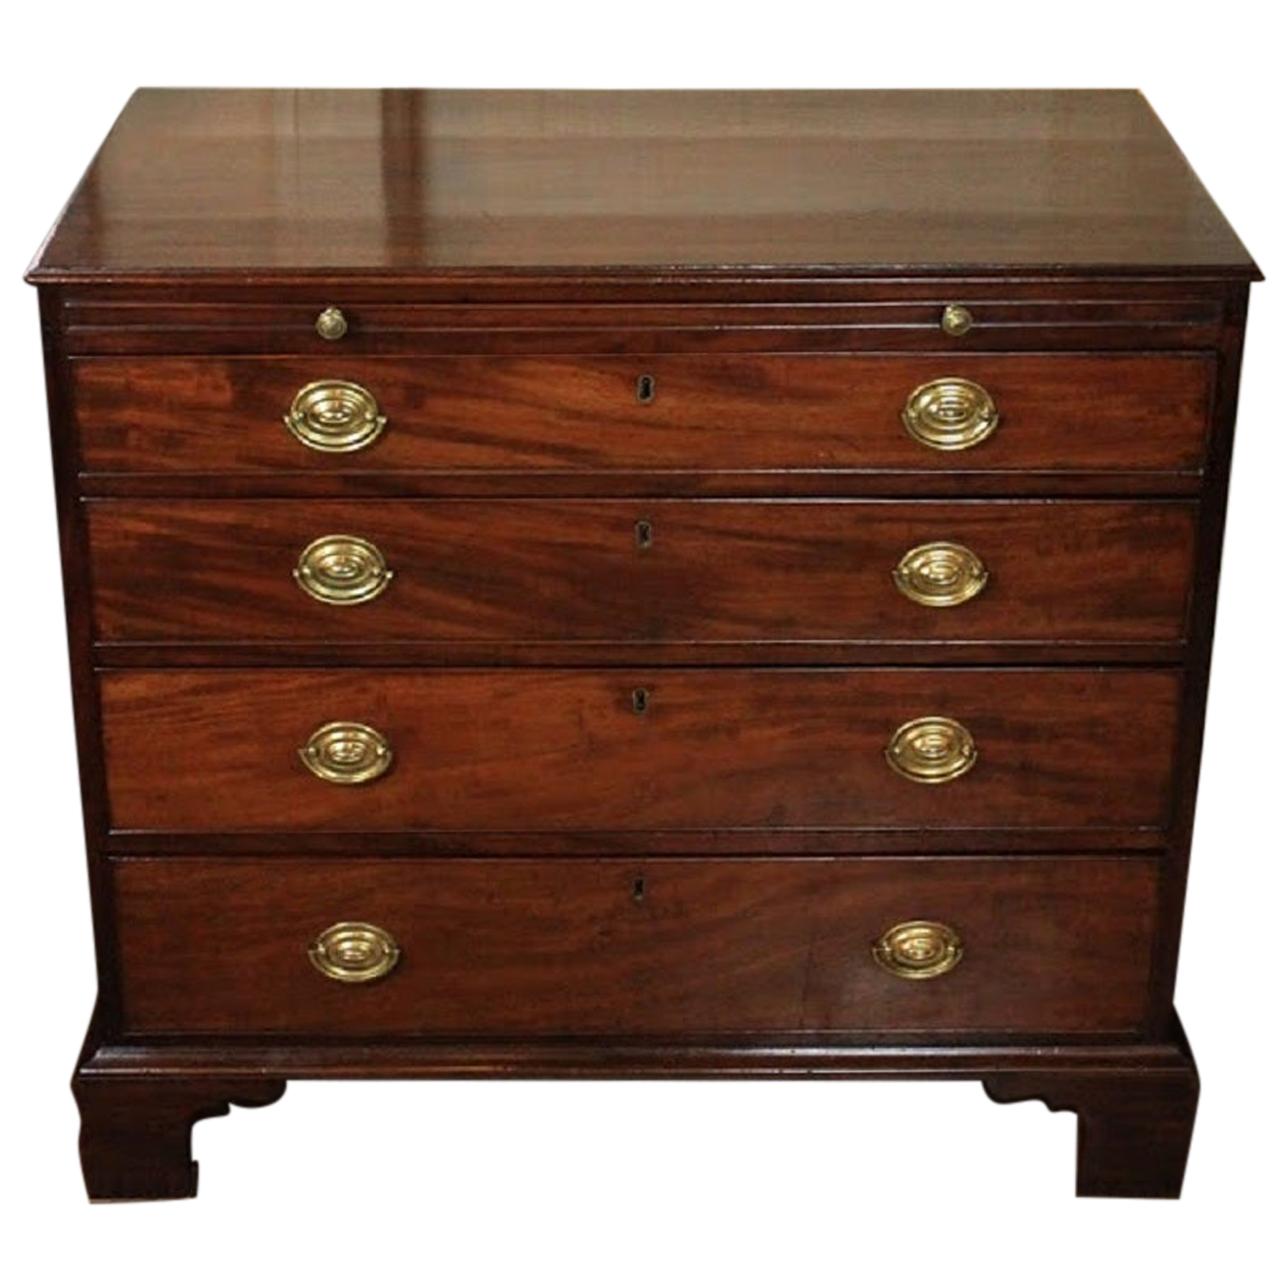 George III Bachelor's Chest of Drawers with Bushing Slide